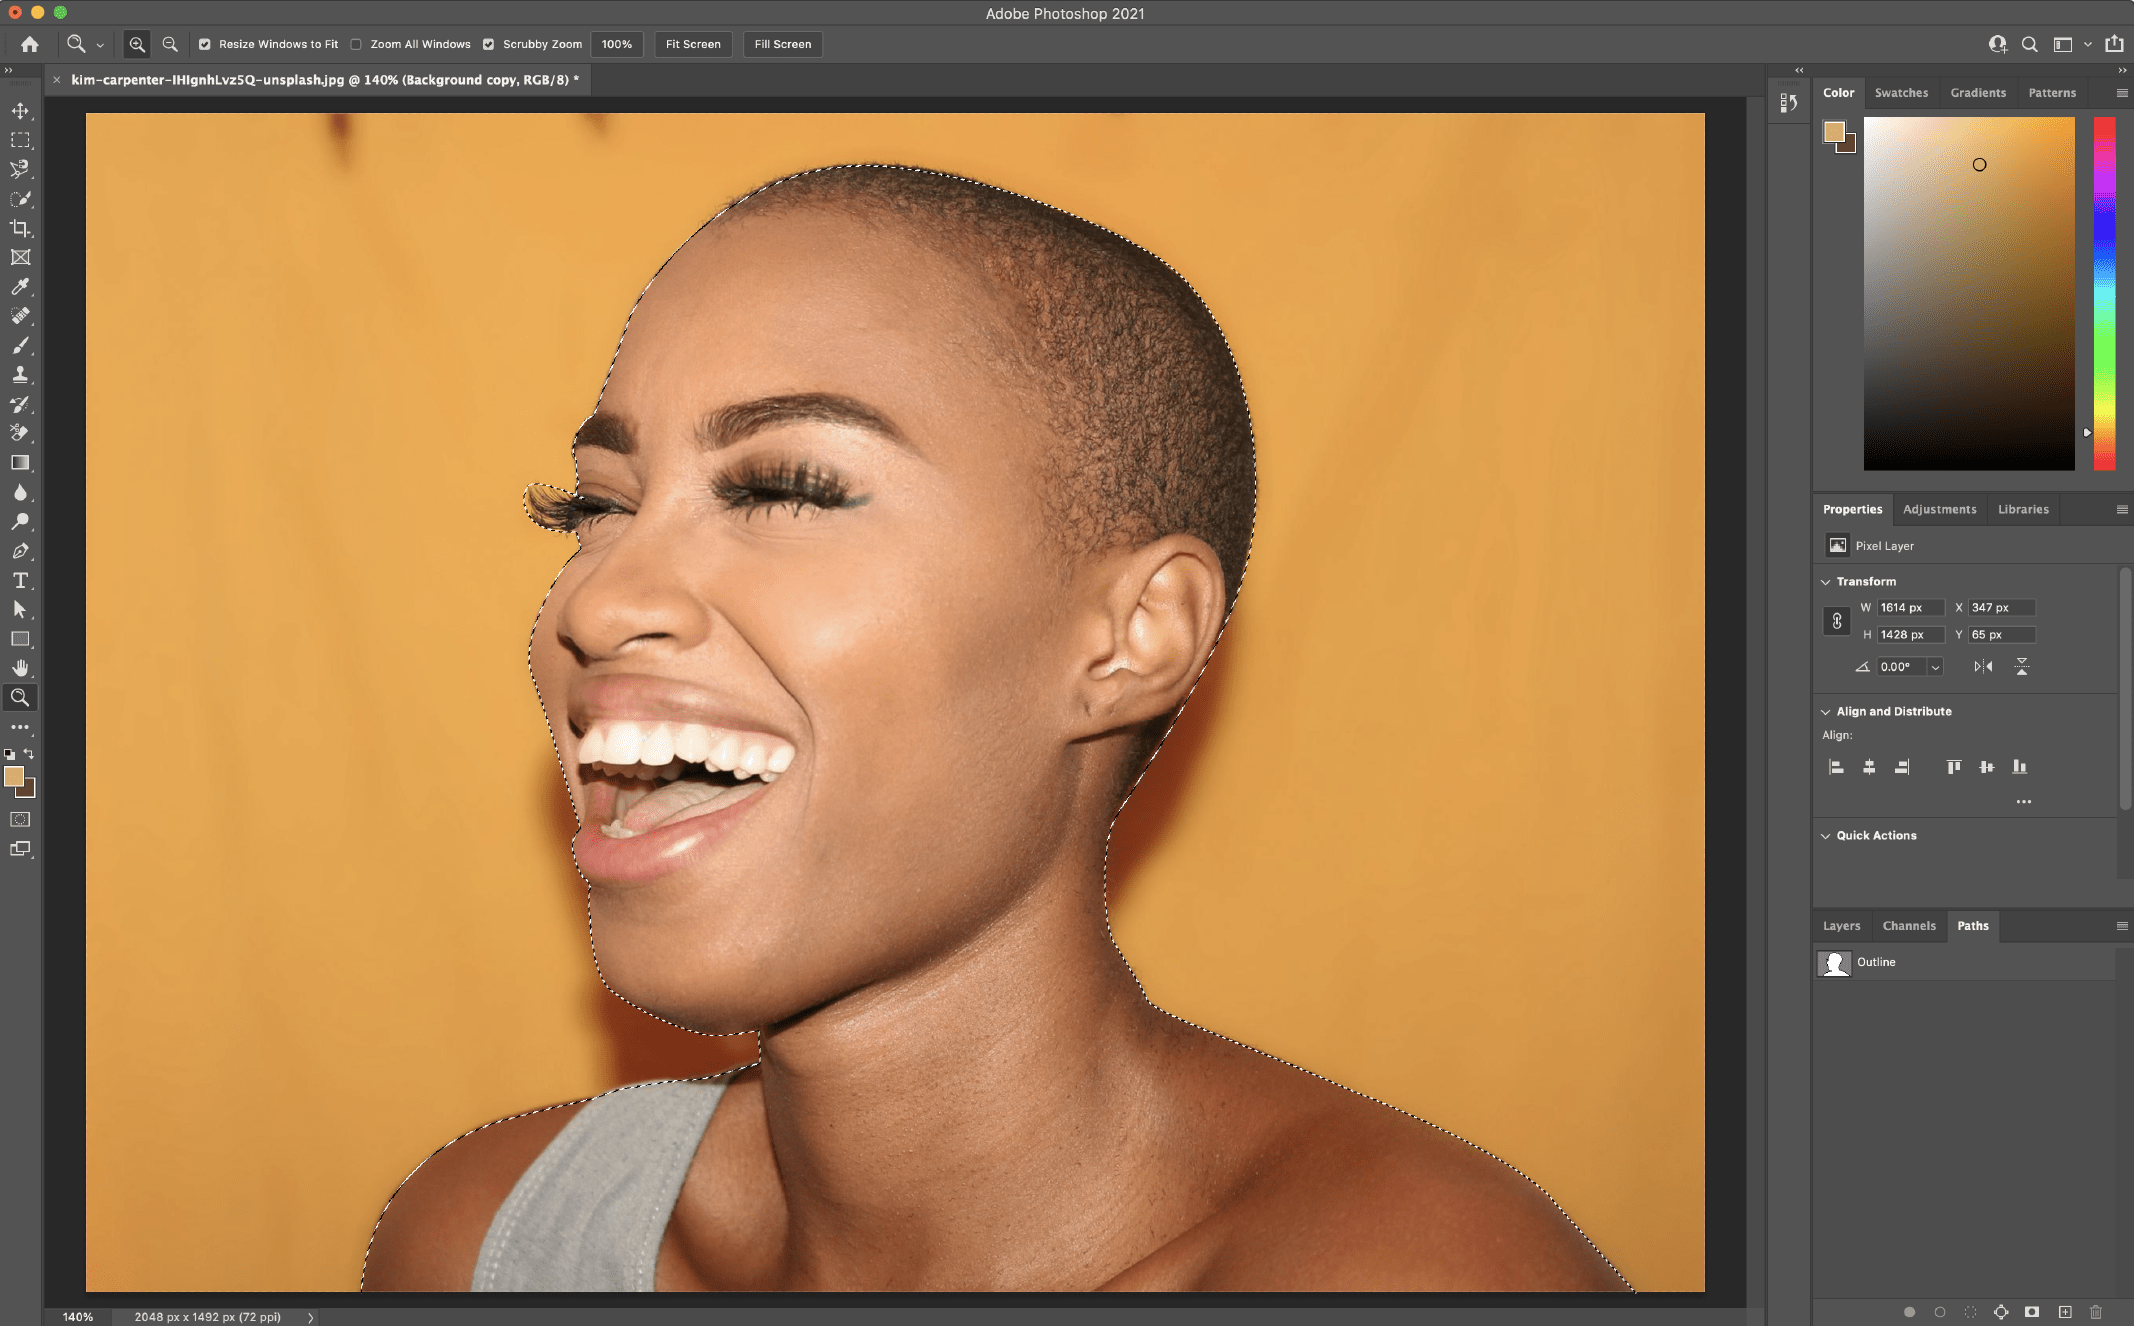 Remove Background in Photoshop using the Pen Tool 3